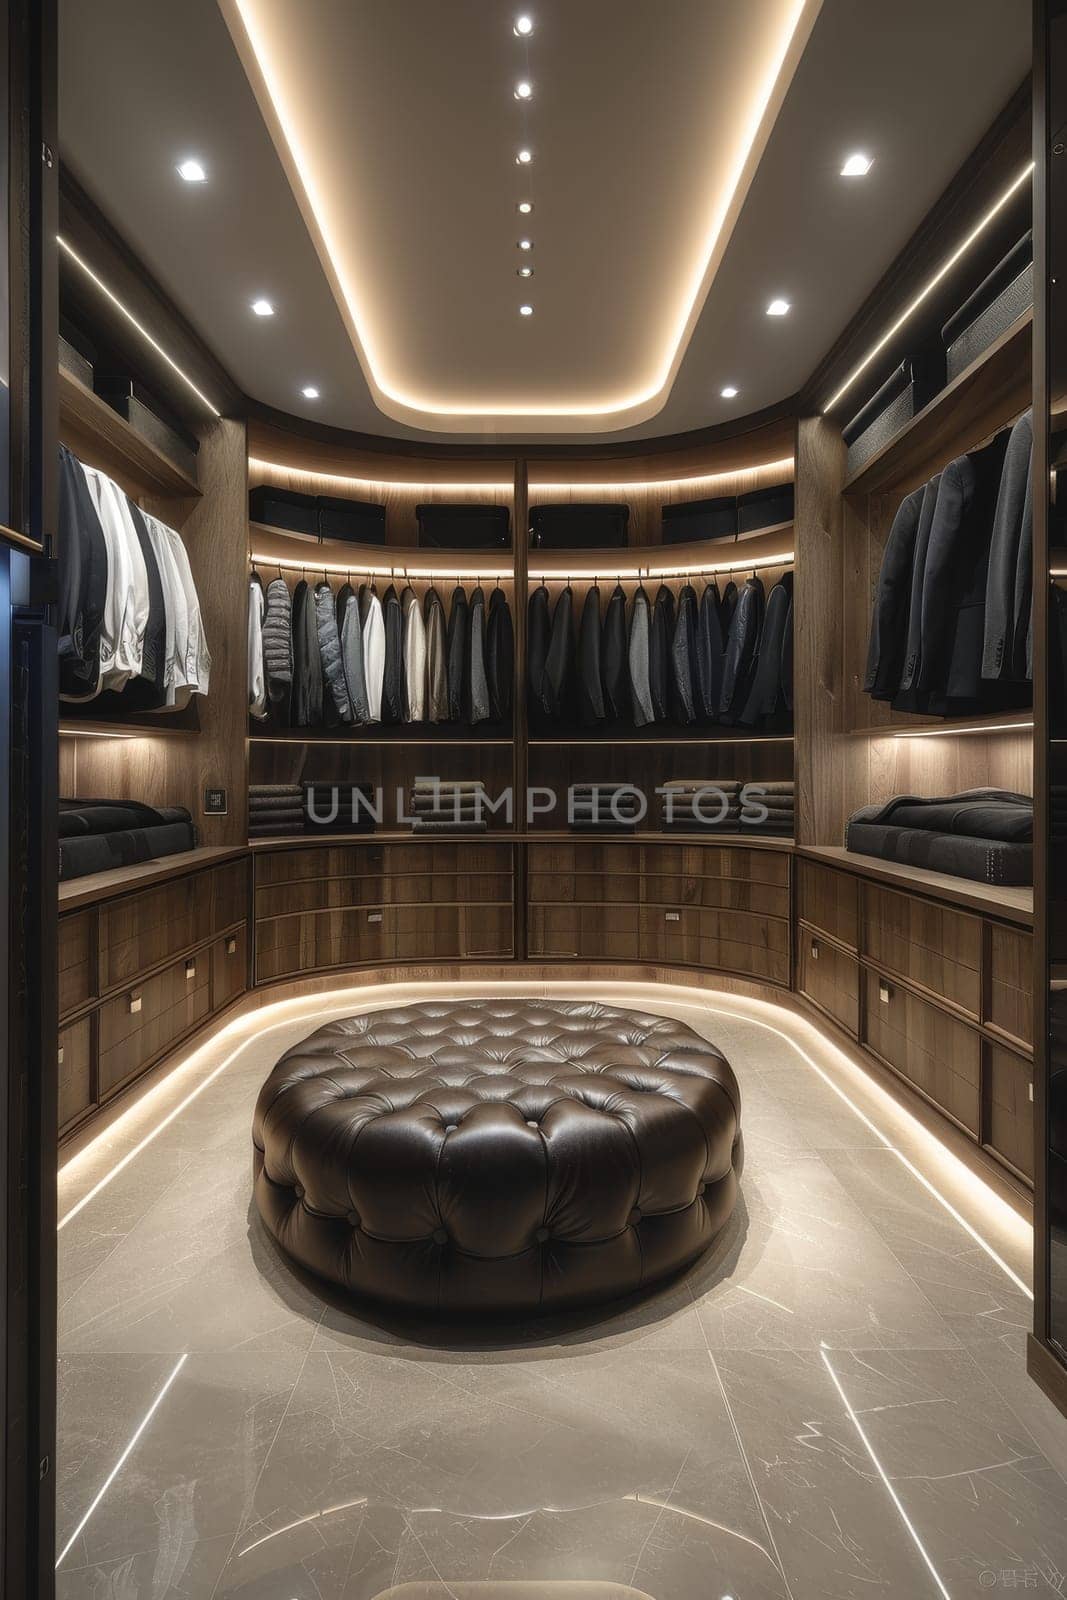 A large walk in closet with a brown ottoman in the center. The closet is well lit and has a modern design